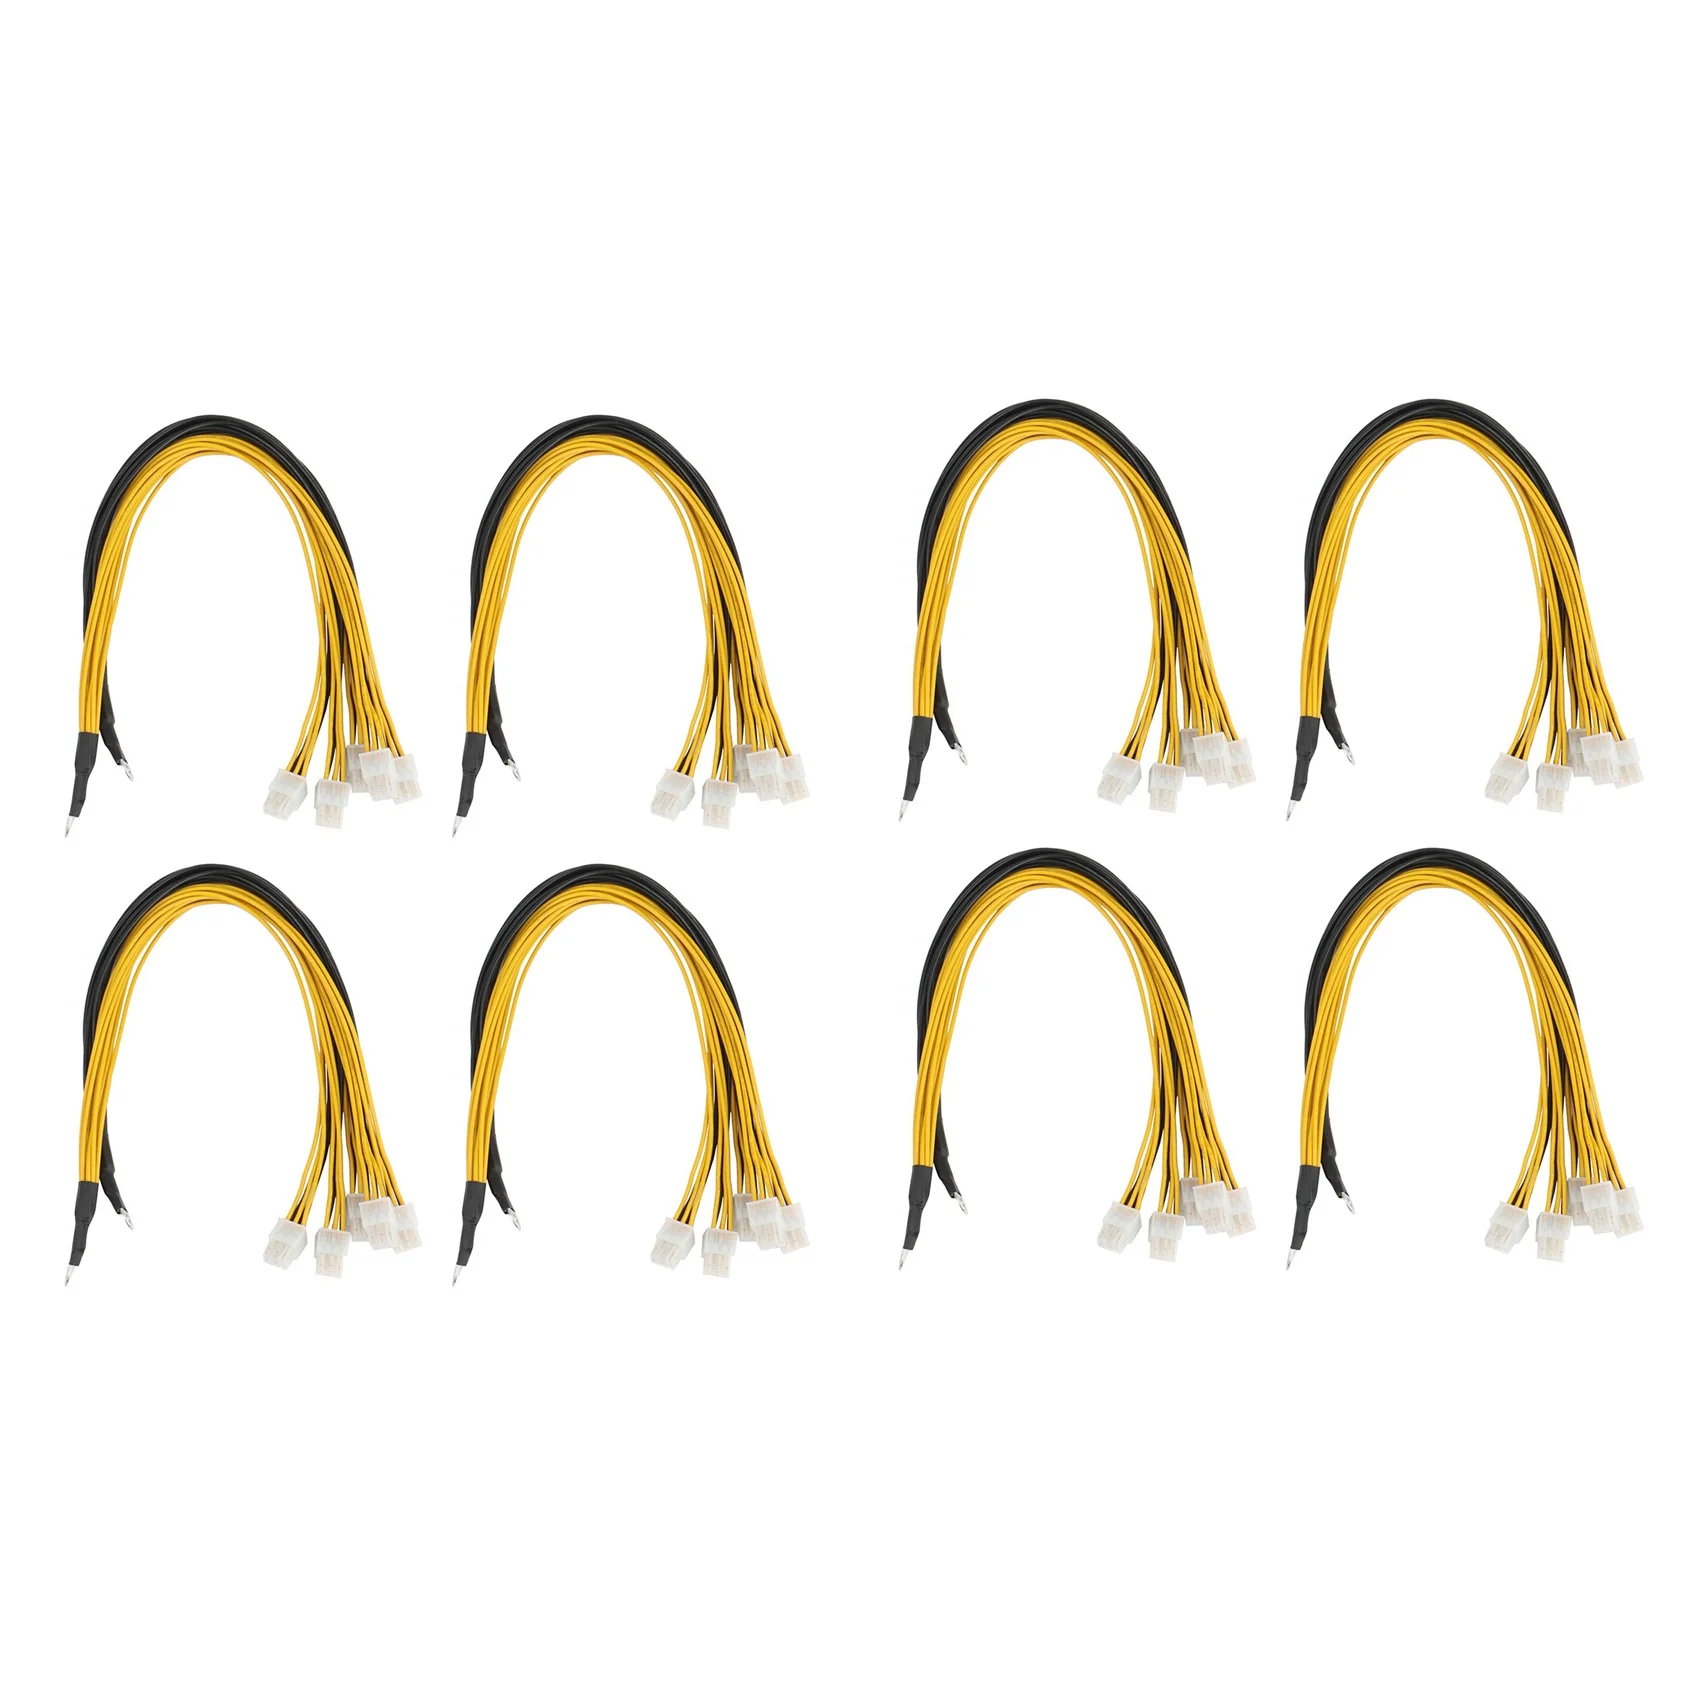 

8Pack 6Pin Connector Server Power Supply Cable PCIe Express for Antminer S9 S9I Z9 for P3 P5 Support Miner PSU Cable